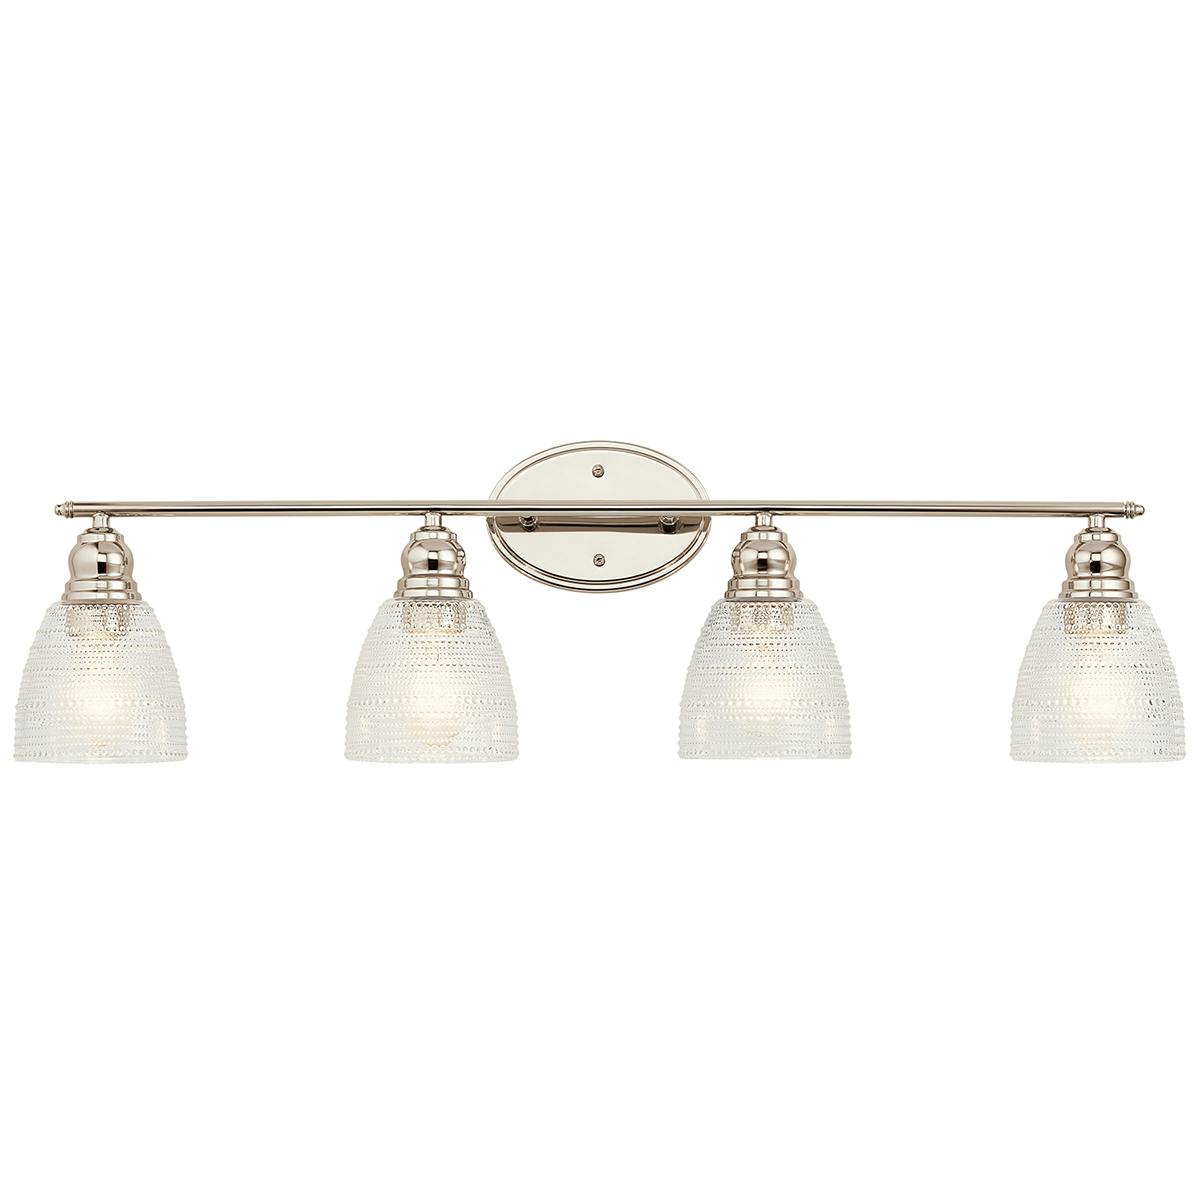 Front view of the Karmarie 4 Light Vanity Light Nickel on a white background